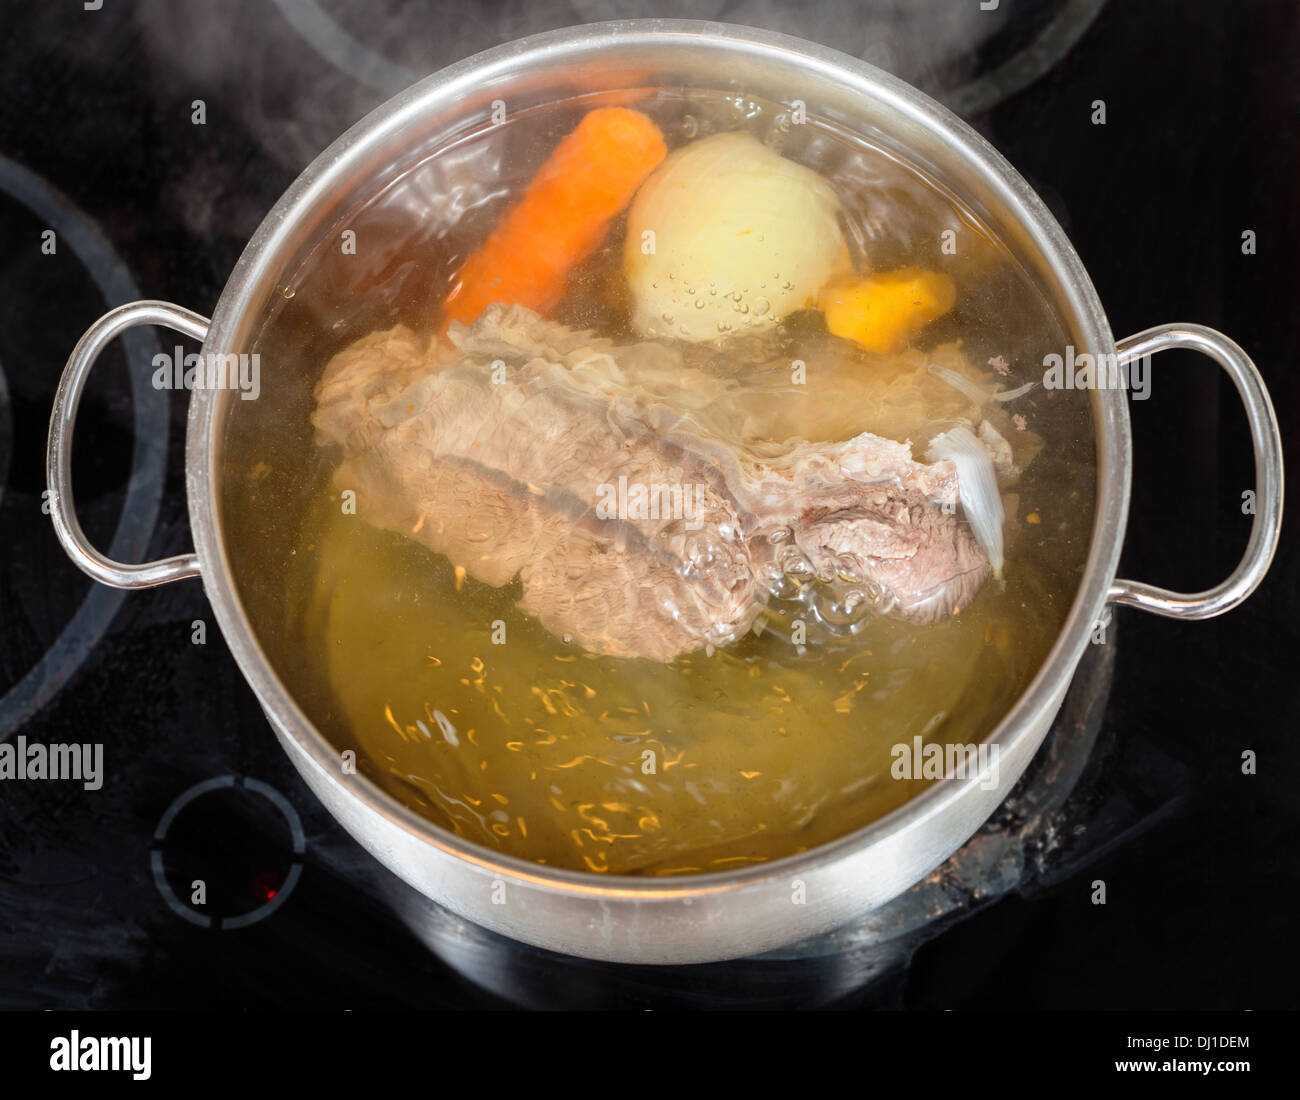 simmer of beef broth with seasoning vegetables in pan on glass ceramic cooker Stock Photo